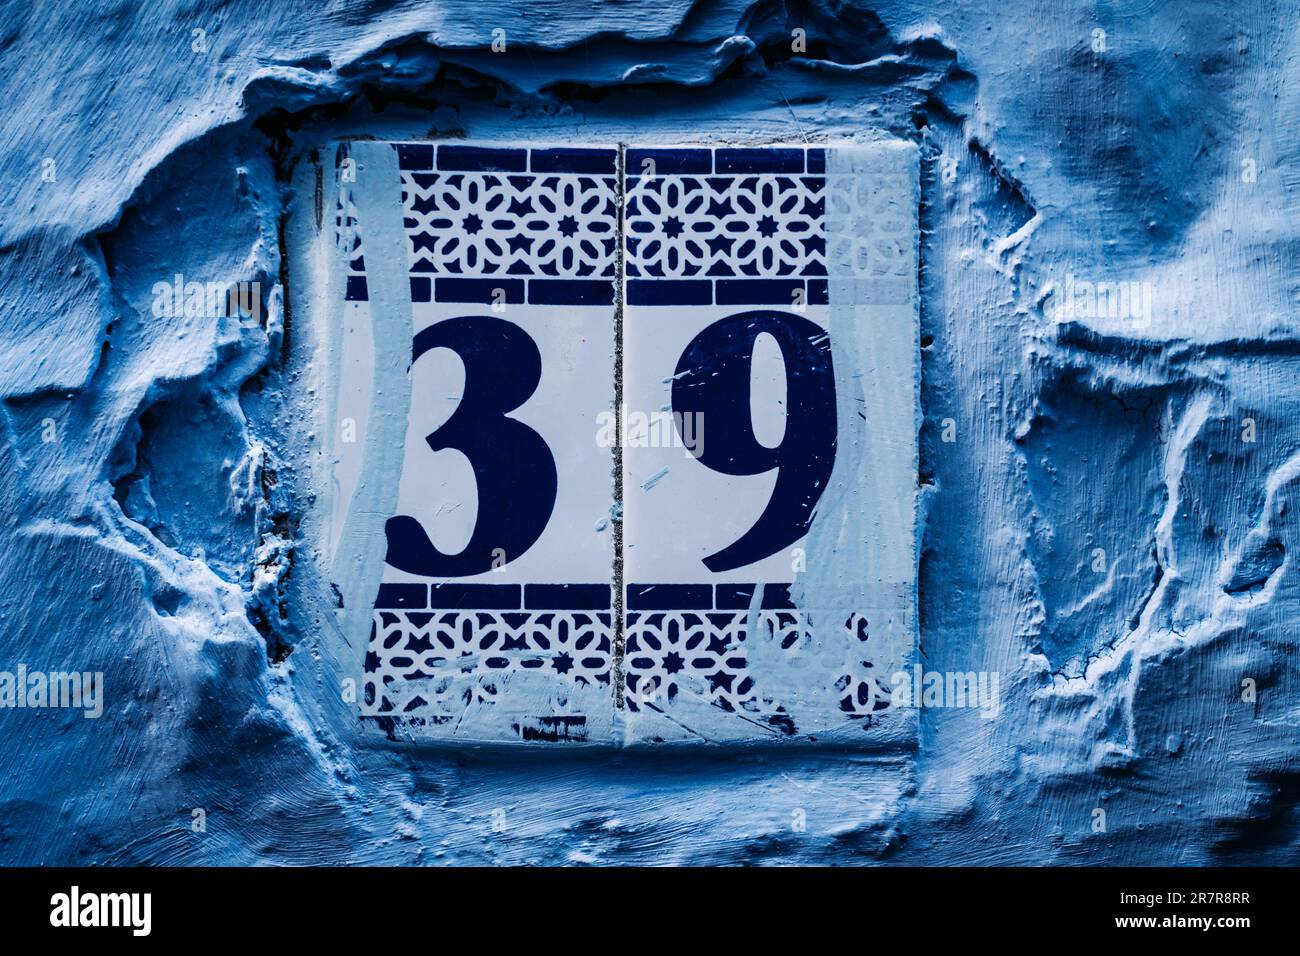 Vibrant blue house post: Numbers adorn this eye-catching house post, creating an intriguing focal point against the vivid blue backdrop. Stock Photo